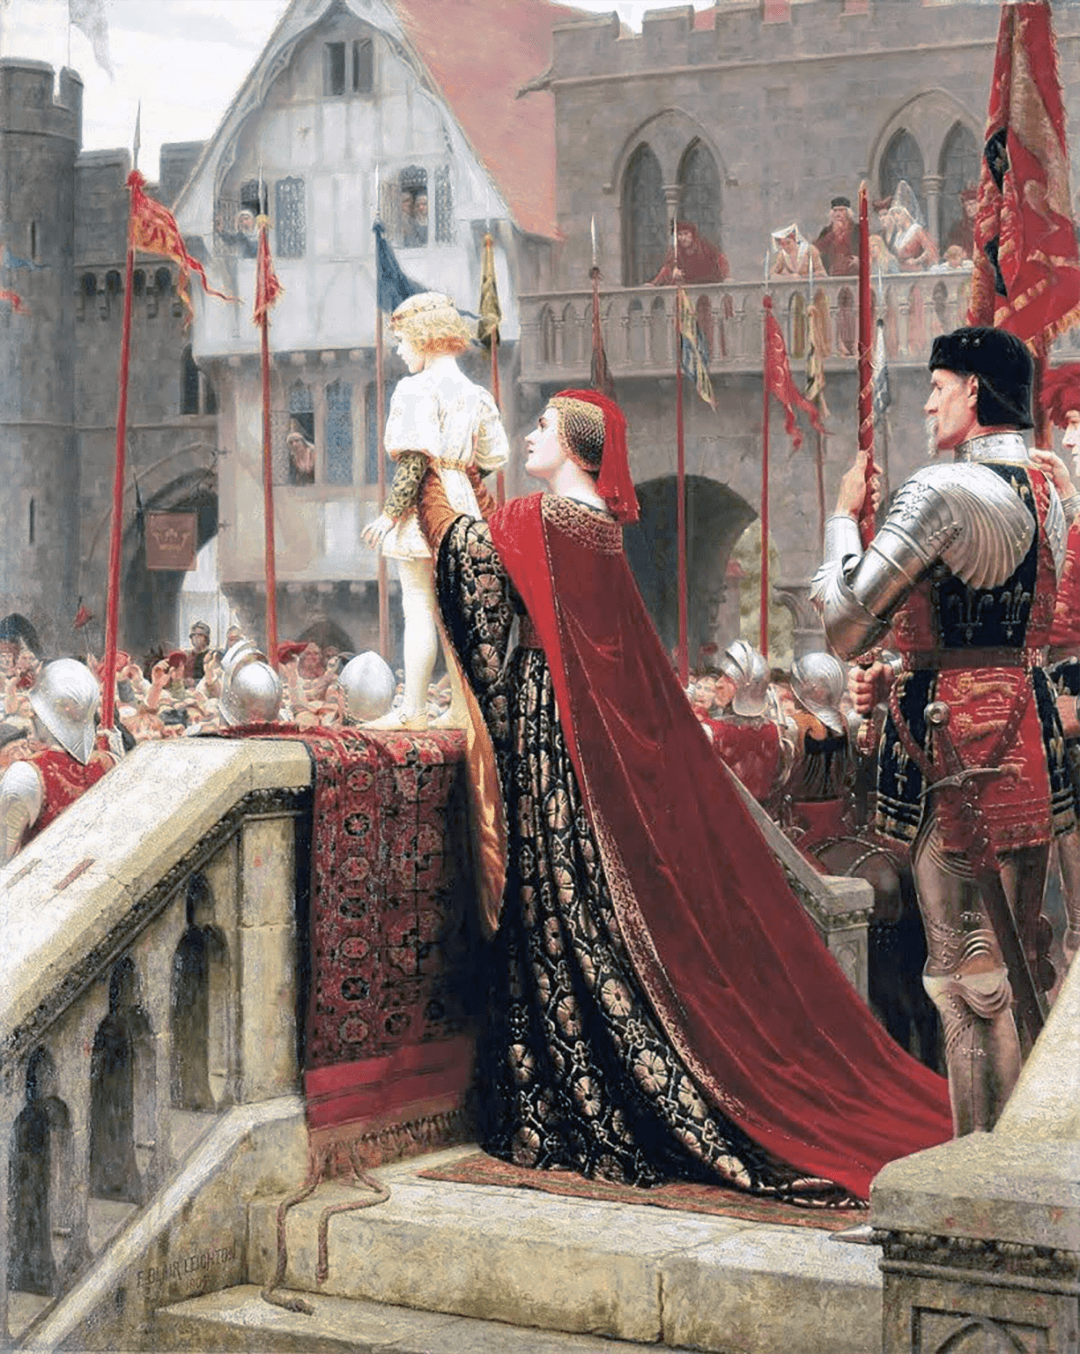  "A Little Prince Likely in Time to Bless a Royal Throne (or Vox Populi)," 1904, Edmund Leighton. Oil on canvas. Private Collection. (Public Domain)